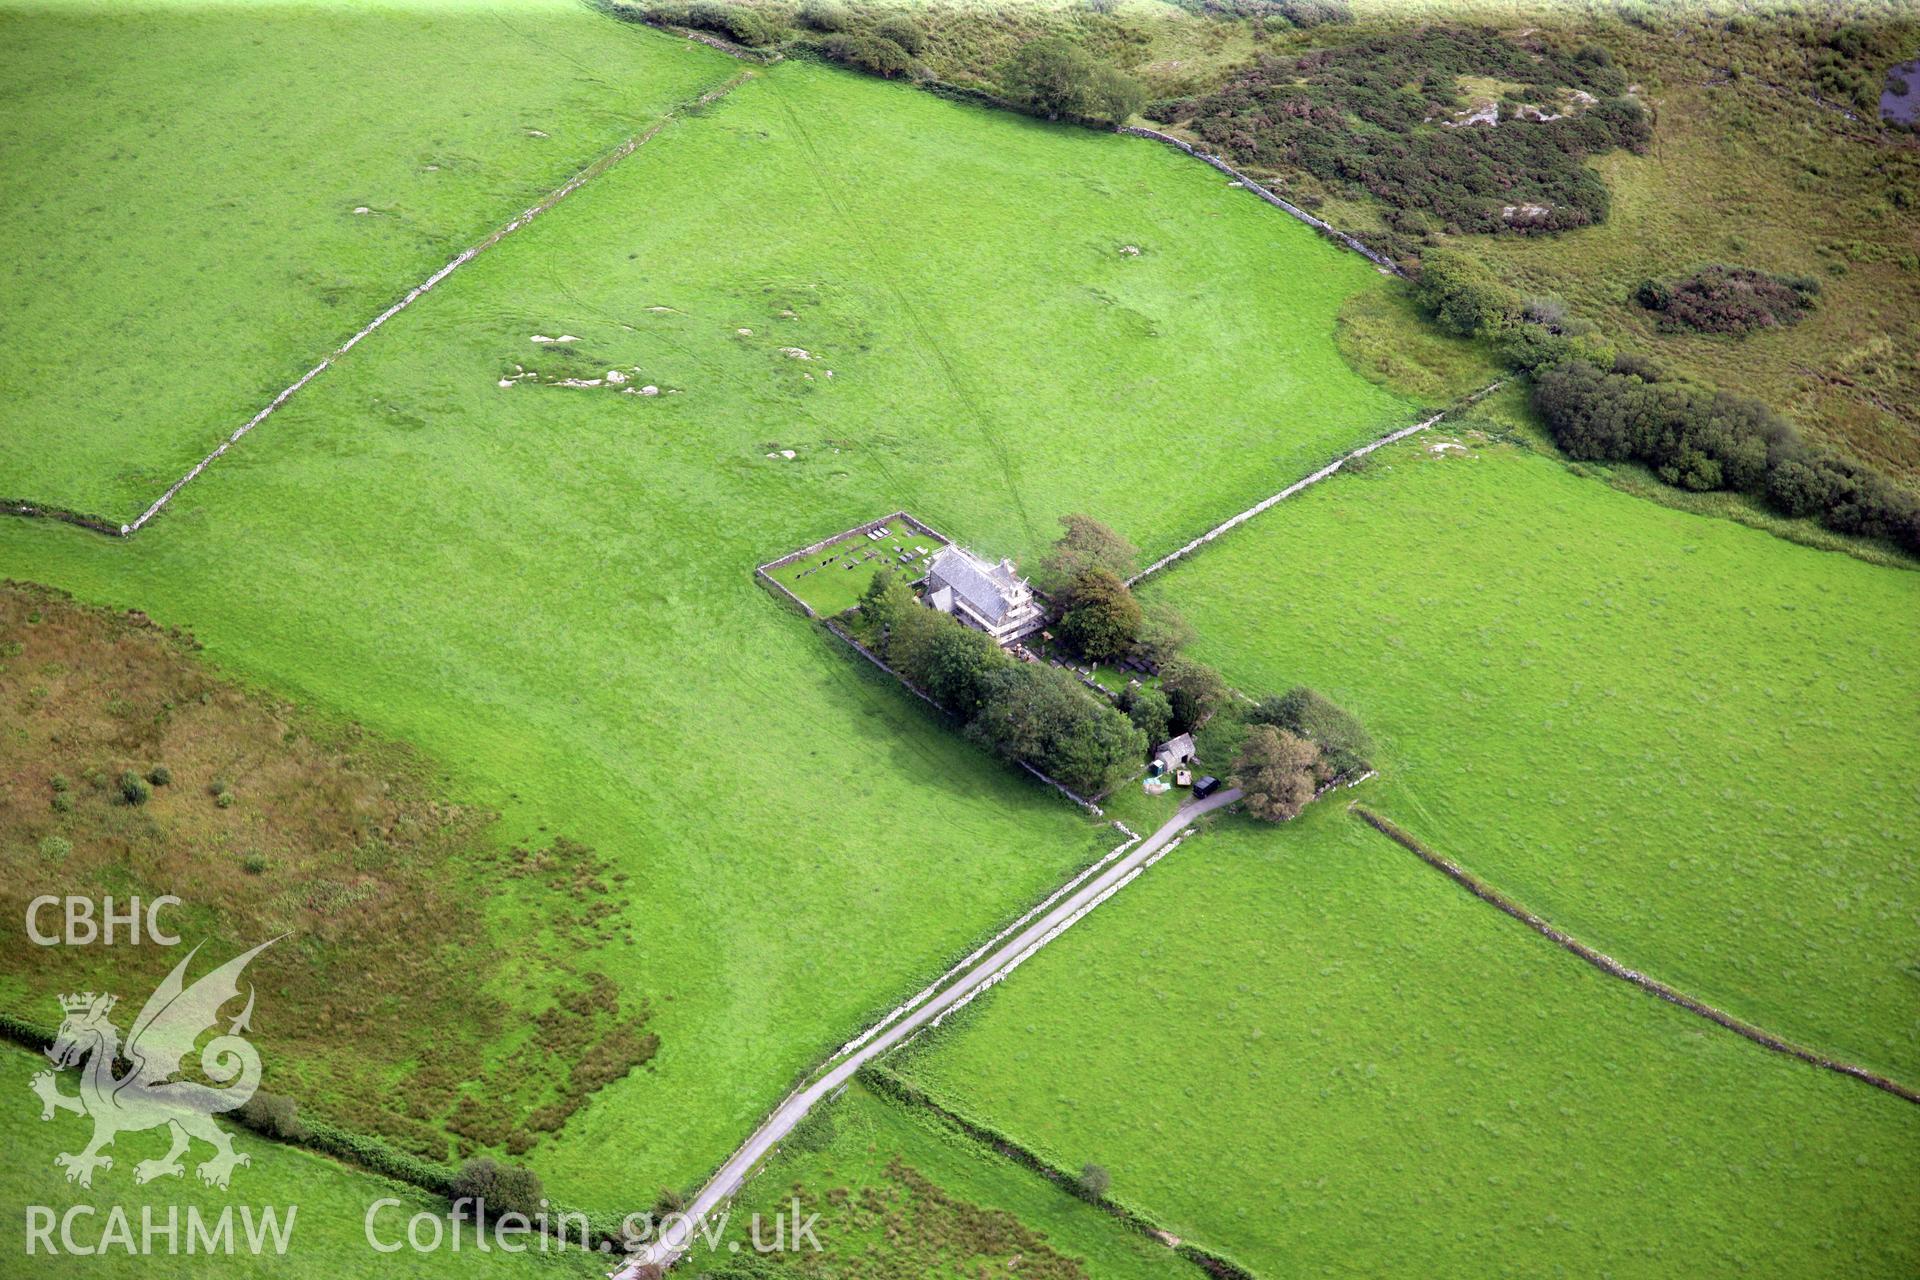 RCAHMW colour oblique photograph of St Cynhaiarn's Church, north-east of Criccieth. Taken by Toby Driver on 17/08/2011.